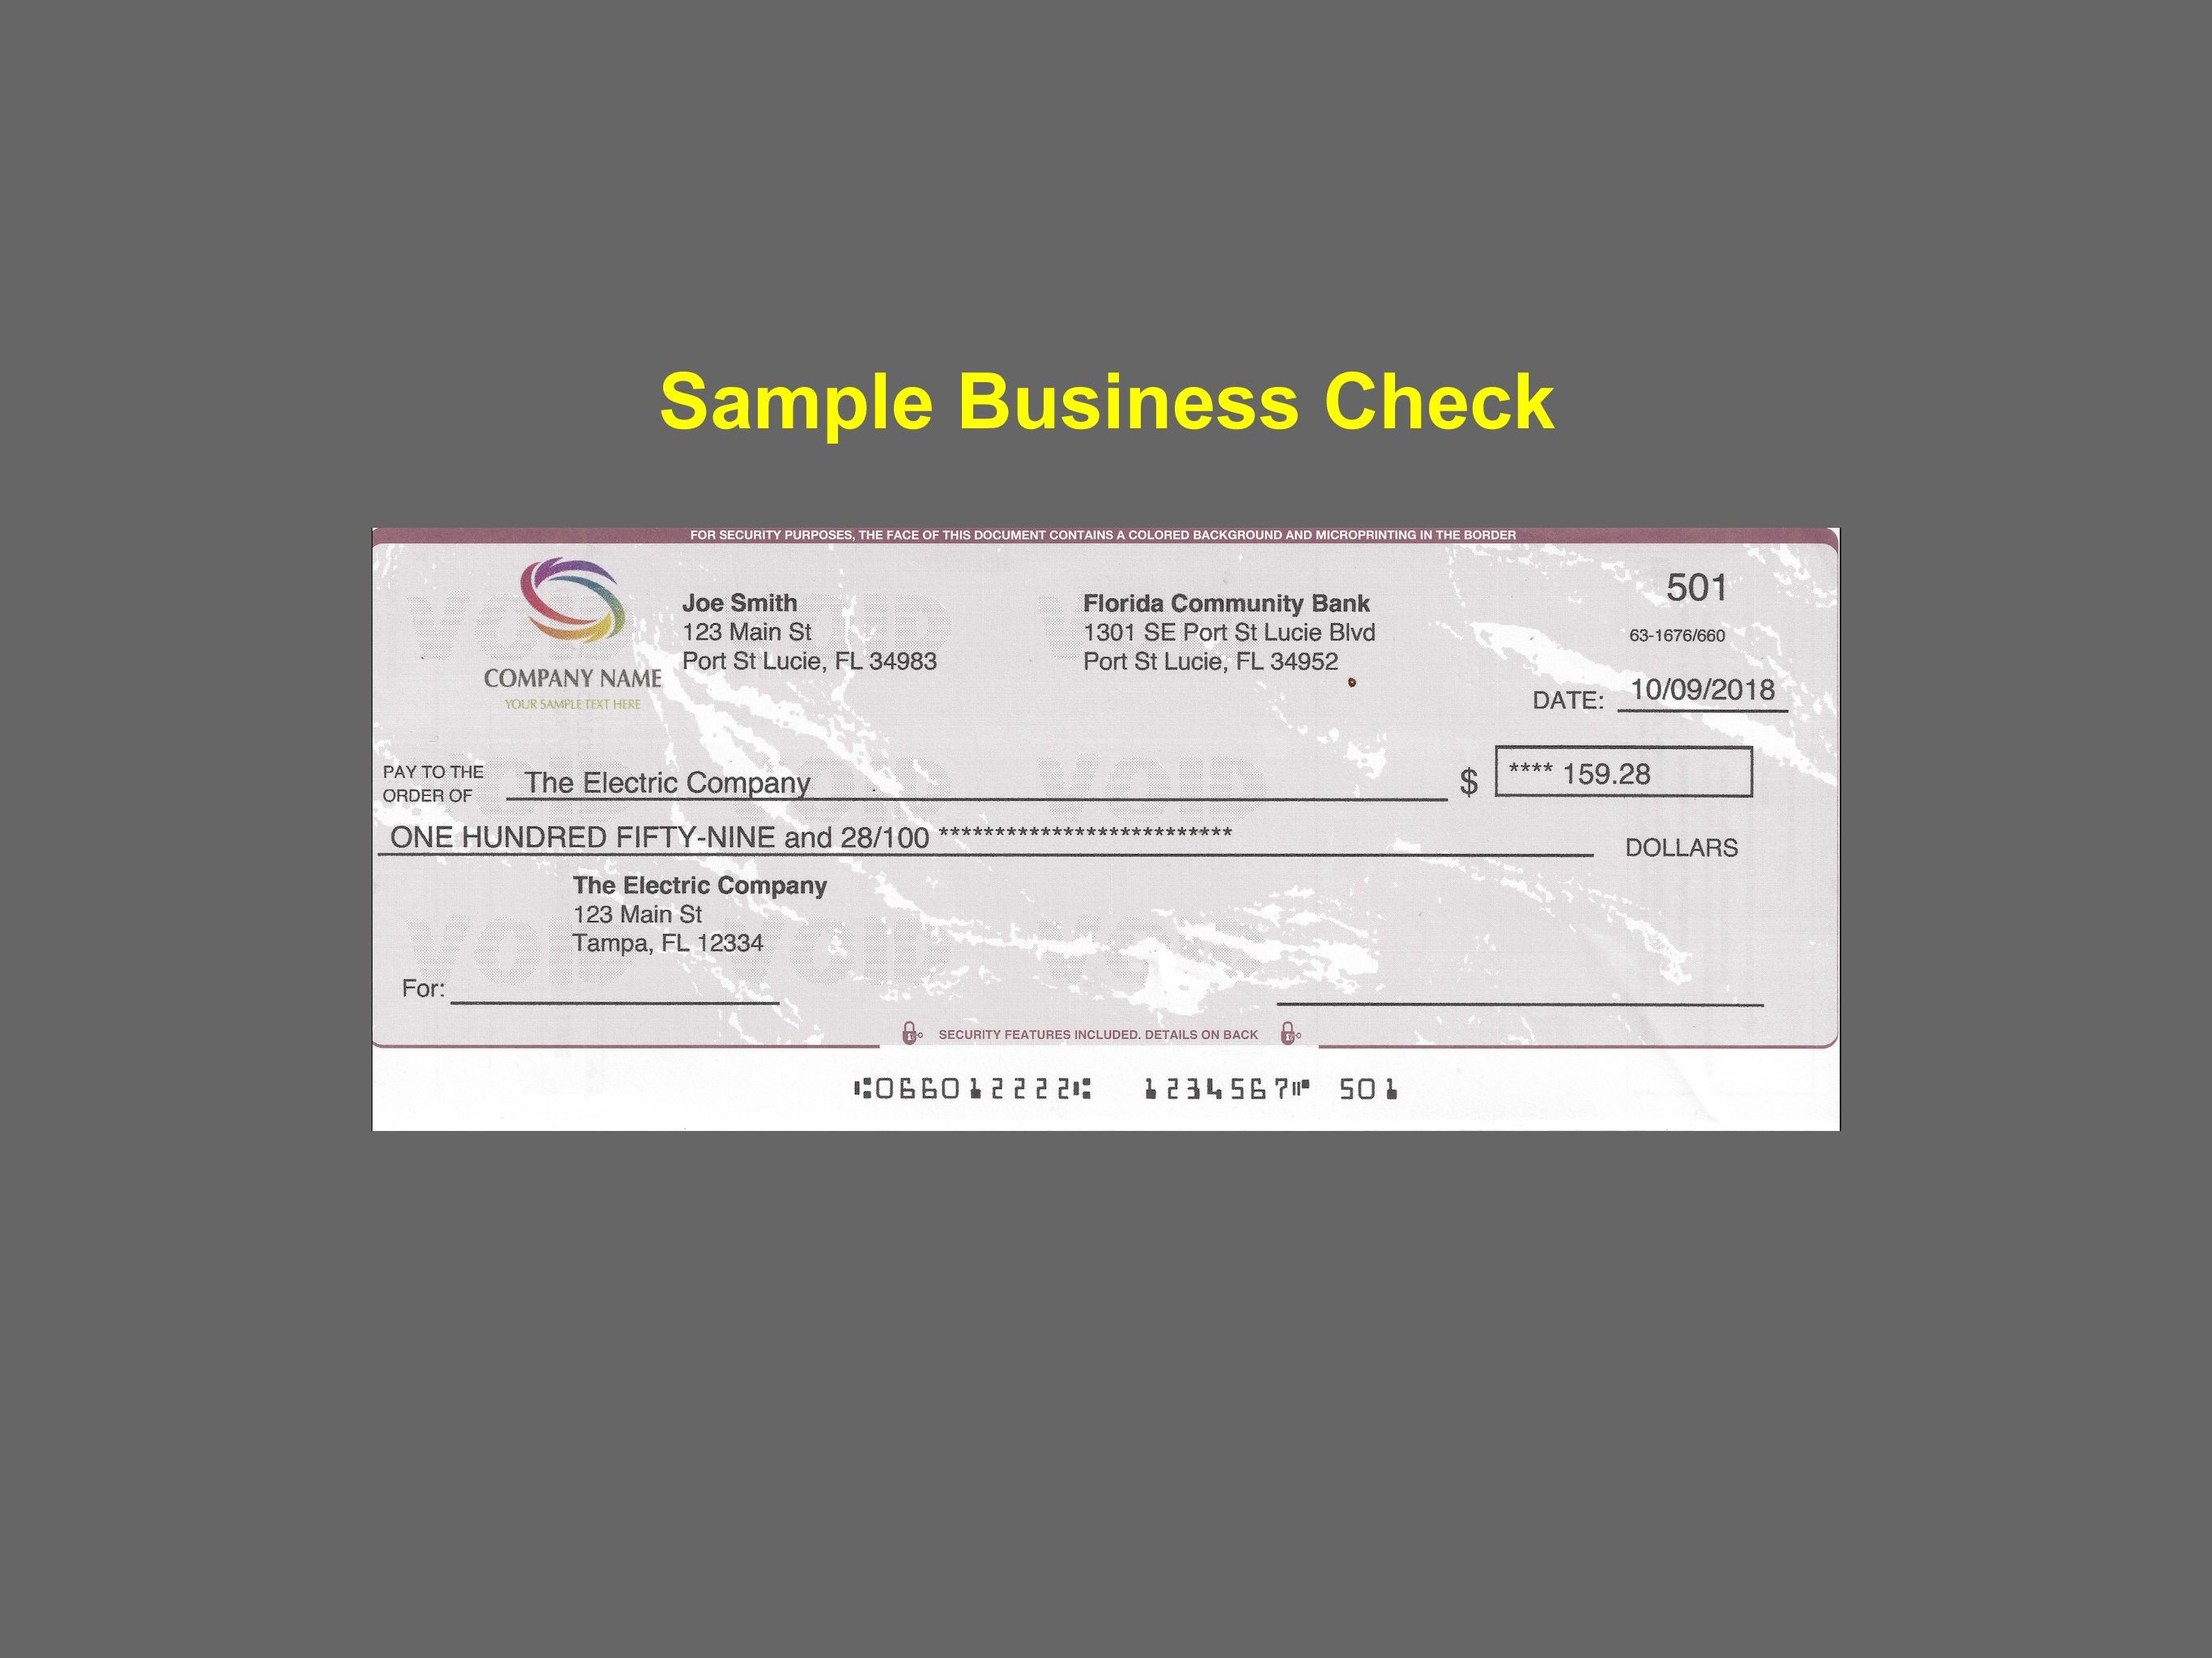 Actual Business check from blank stock.